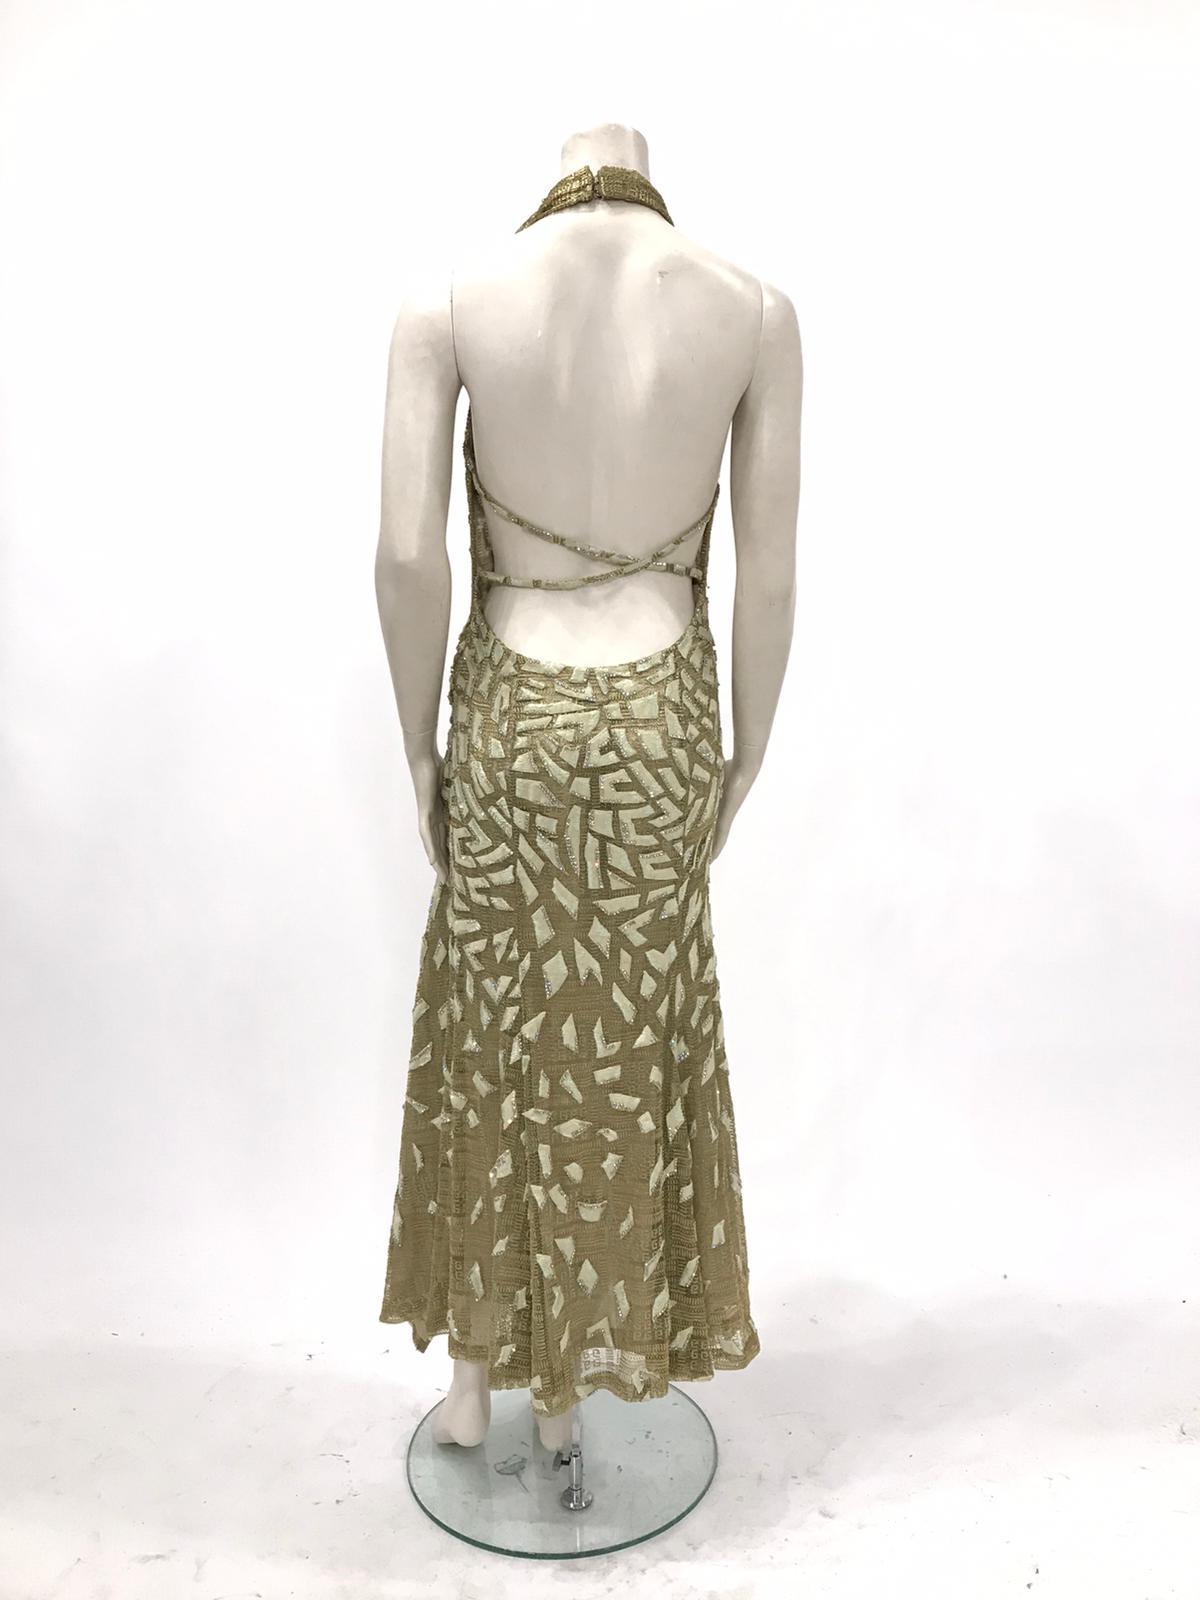 Women's 1990'S GIANNI VERSACE ATELIÉR Metallic Gold Lamé Lace Gown Covered In Crystals 